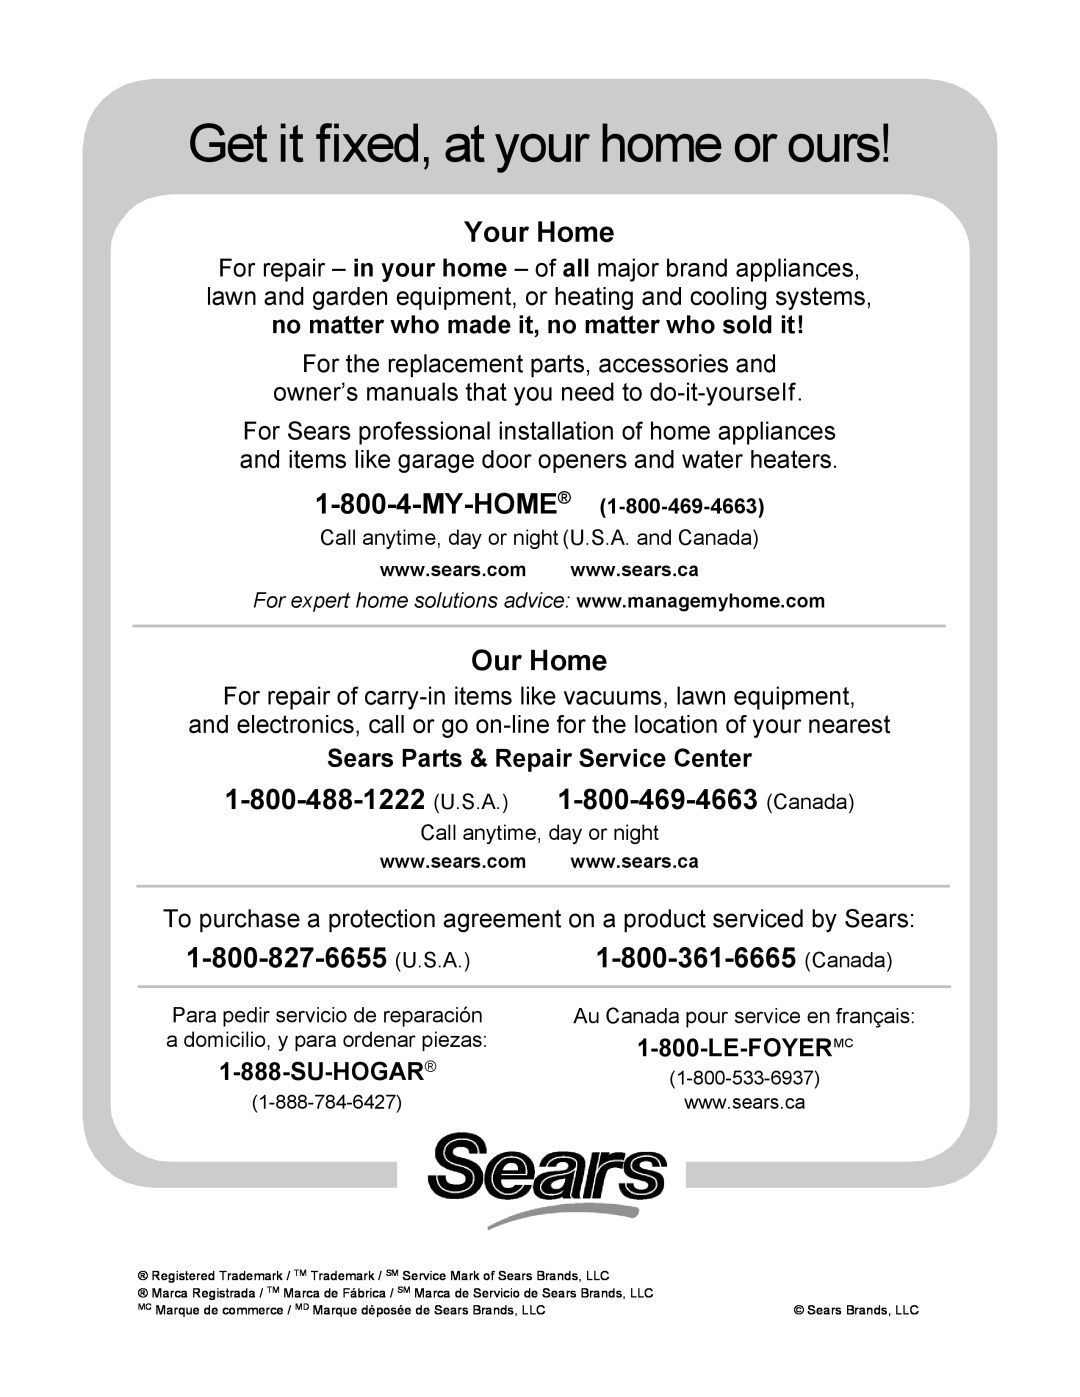 Sears 33731 manual Sears Parts & Repair Service Center, Su-Hogar, Le-Foyermc, Get it fixed, at your home or ours, Your Home 